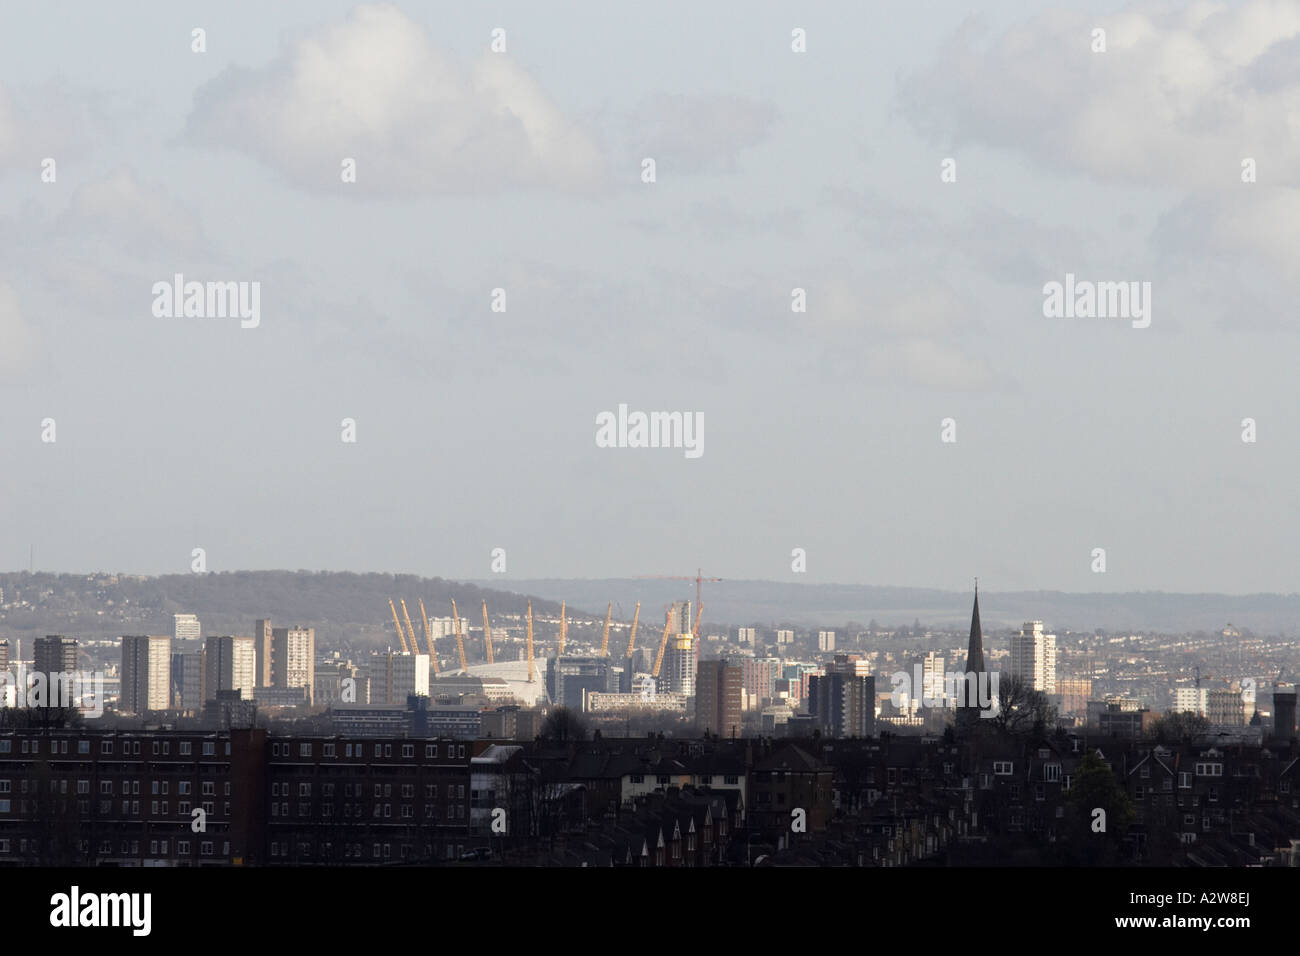 Distant evening view of tall buildings and Millenium Dome Greenwich across suburban rooftops of London from Alexandra Palace Lon Stock Photo